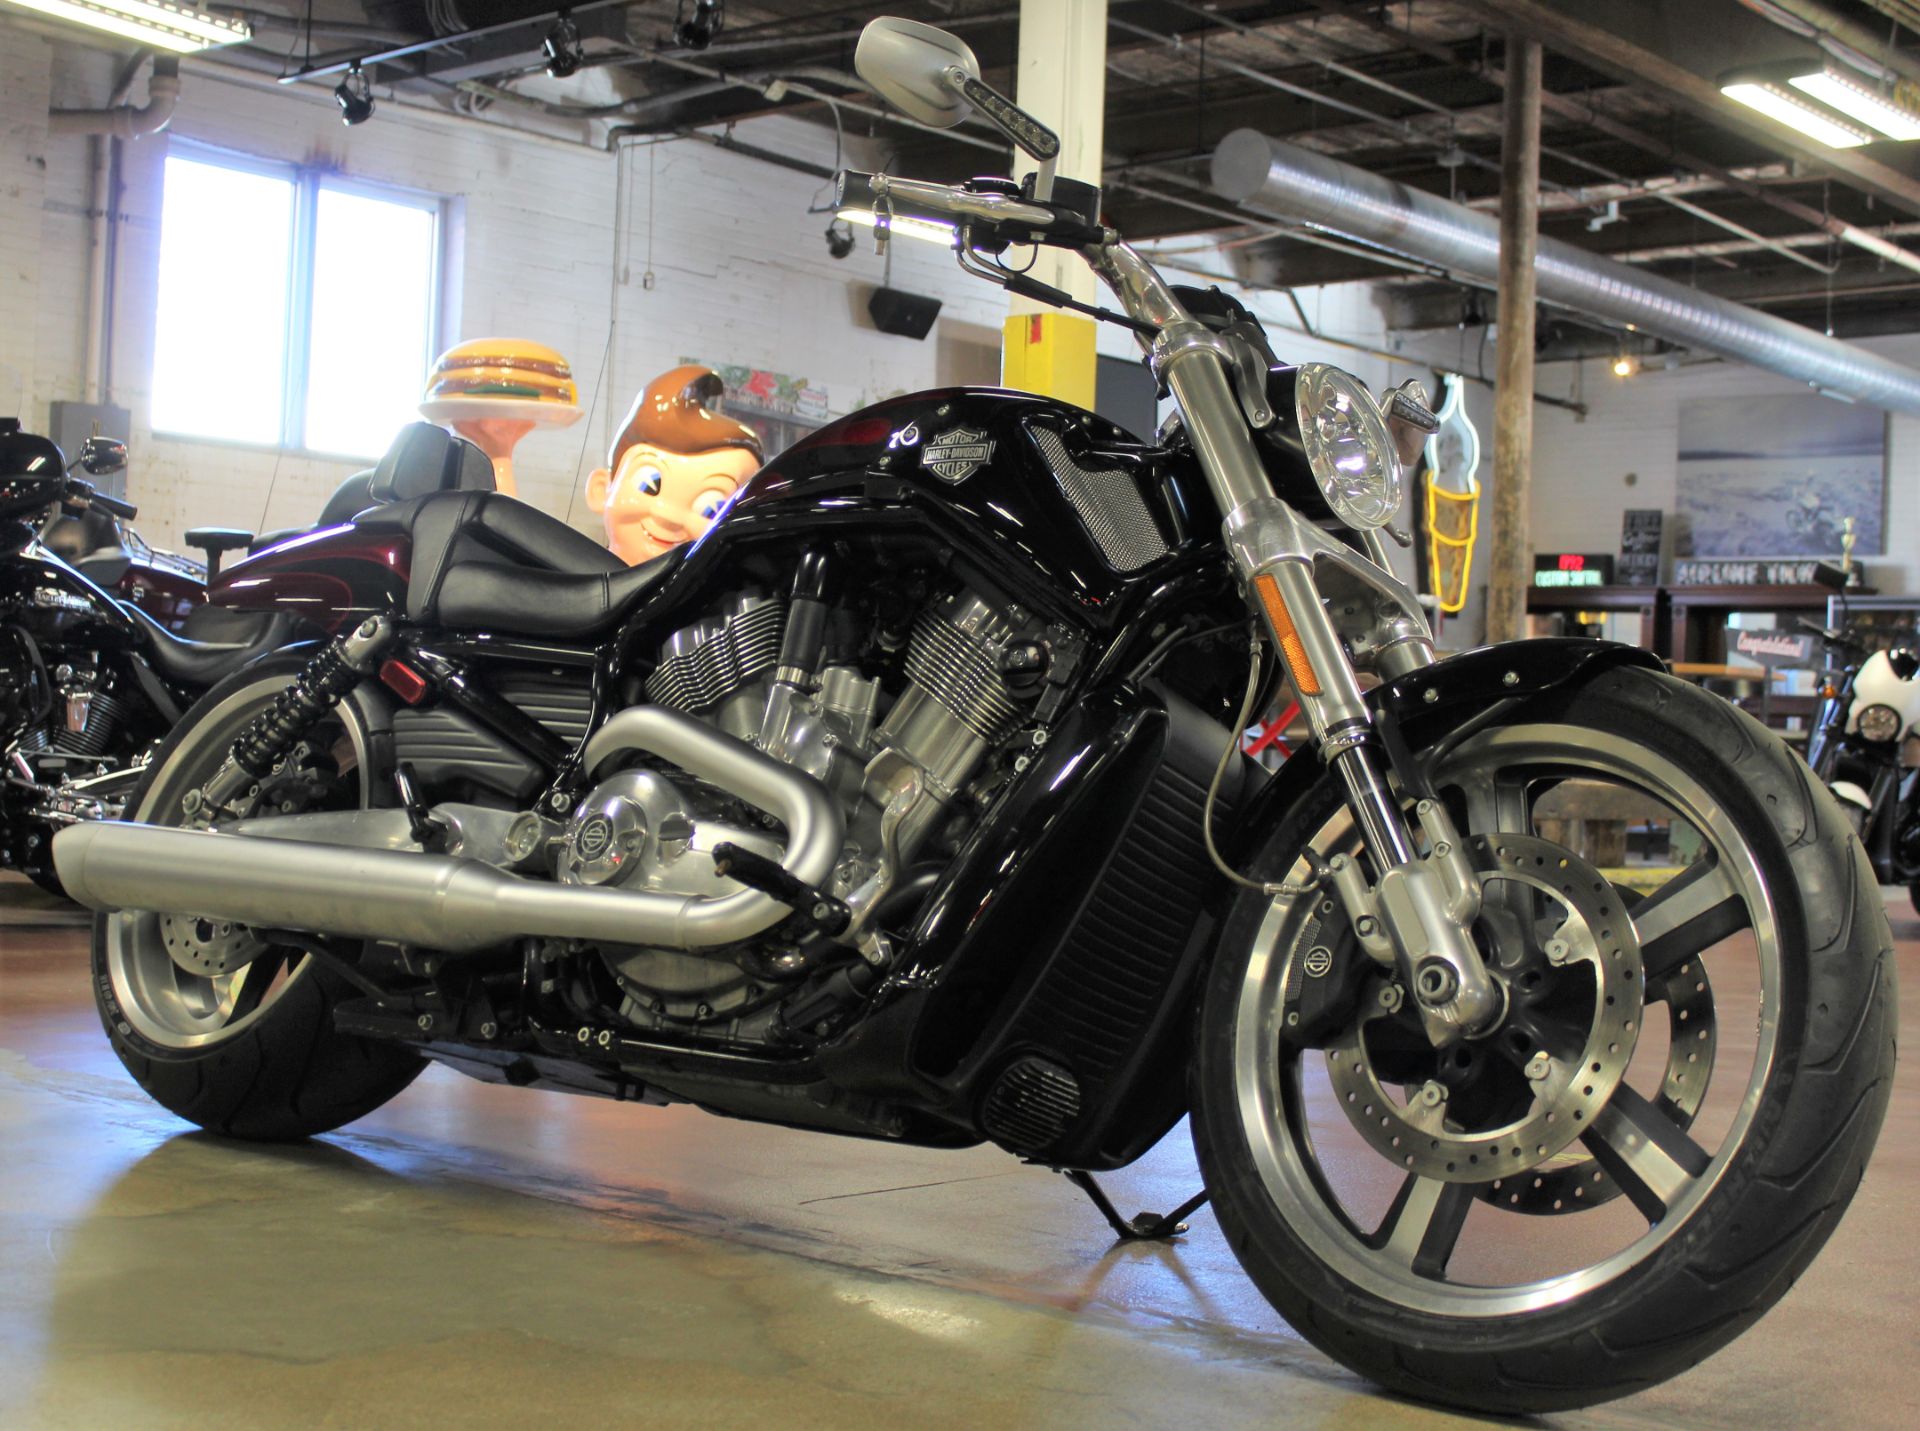 2015 Harley-Davidson V-Rod Muscle® in New London, Connecticut - Photo 2